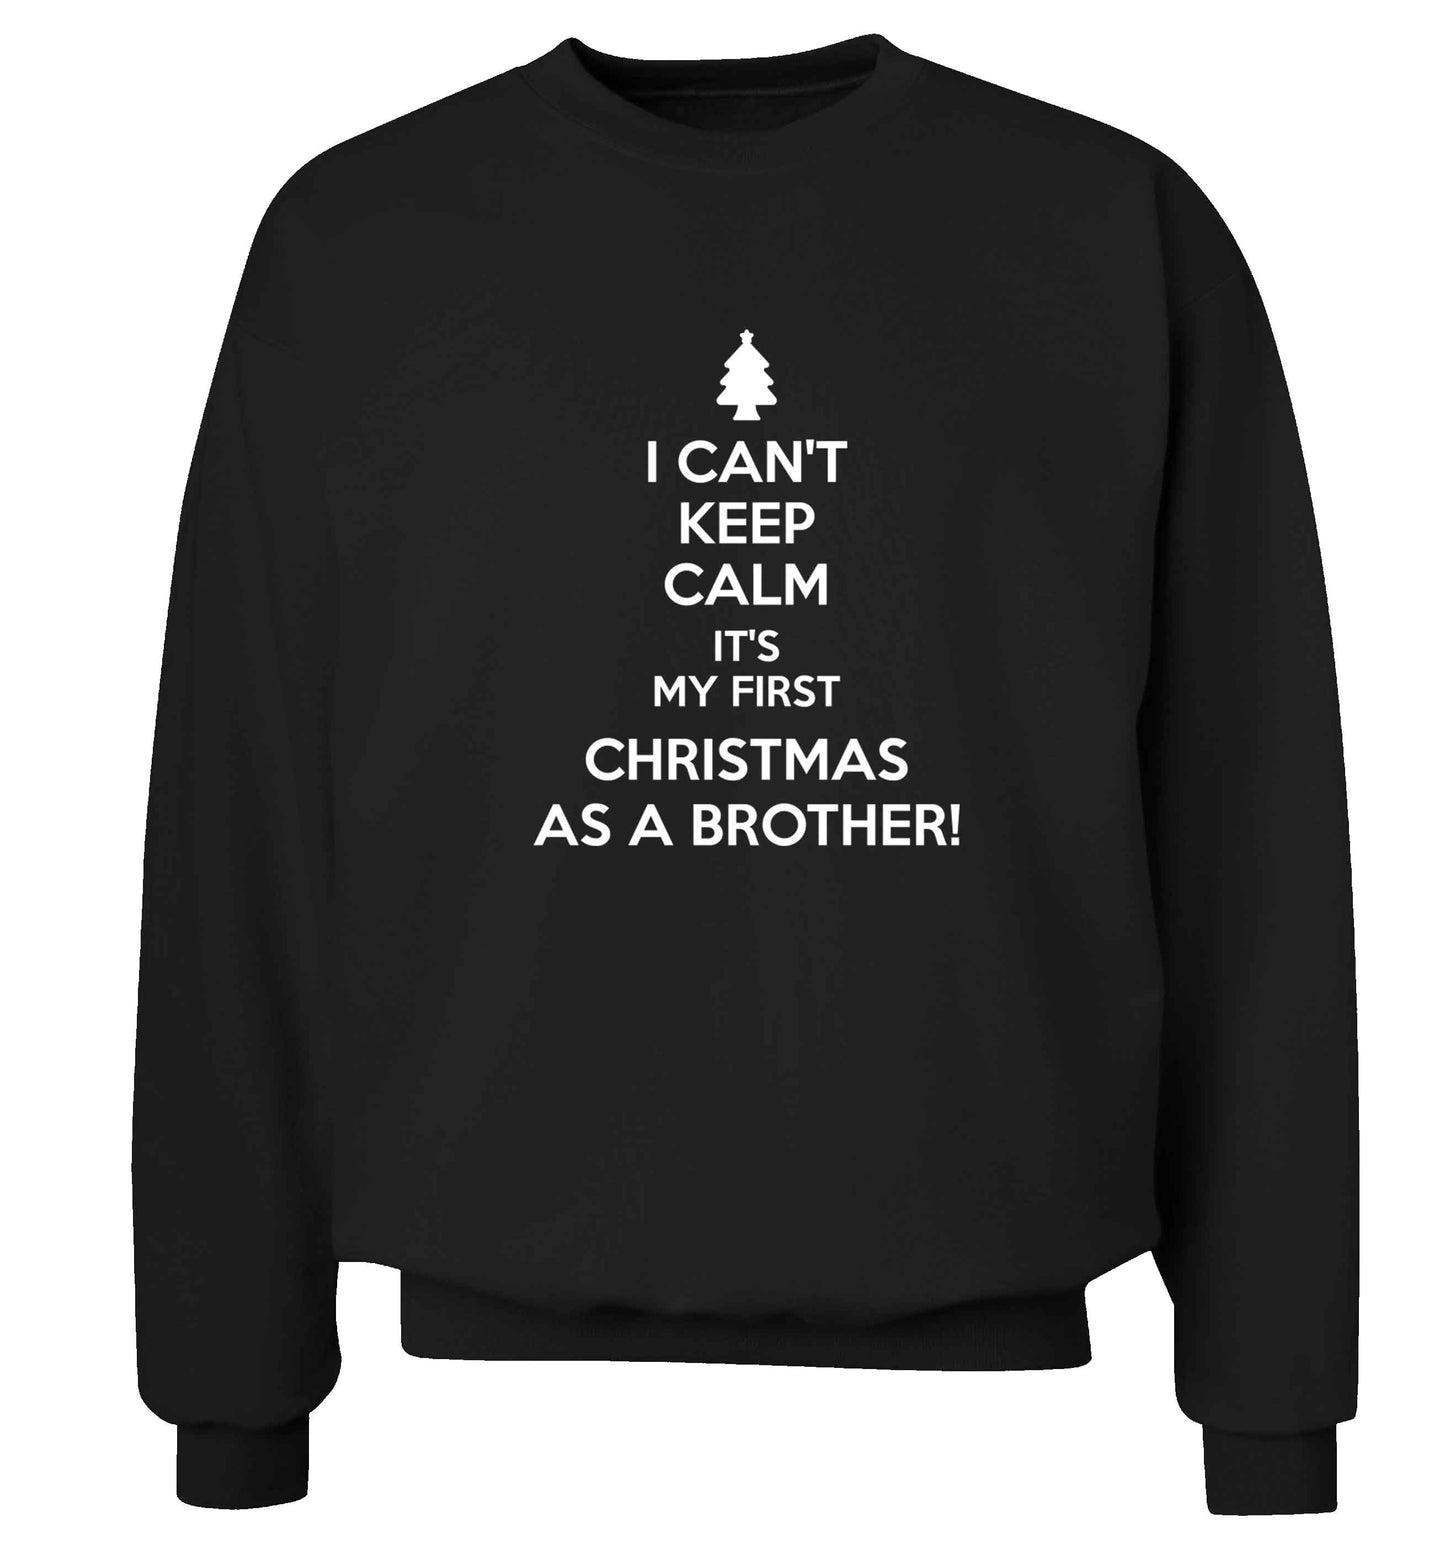 I can't keep calm it's my first Christmas as a brother! Adult's unisex black Sweater 2XL